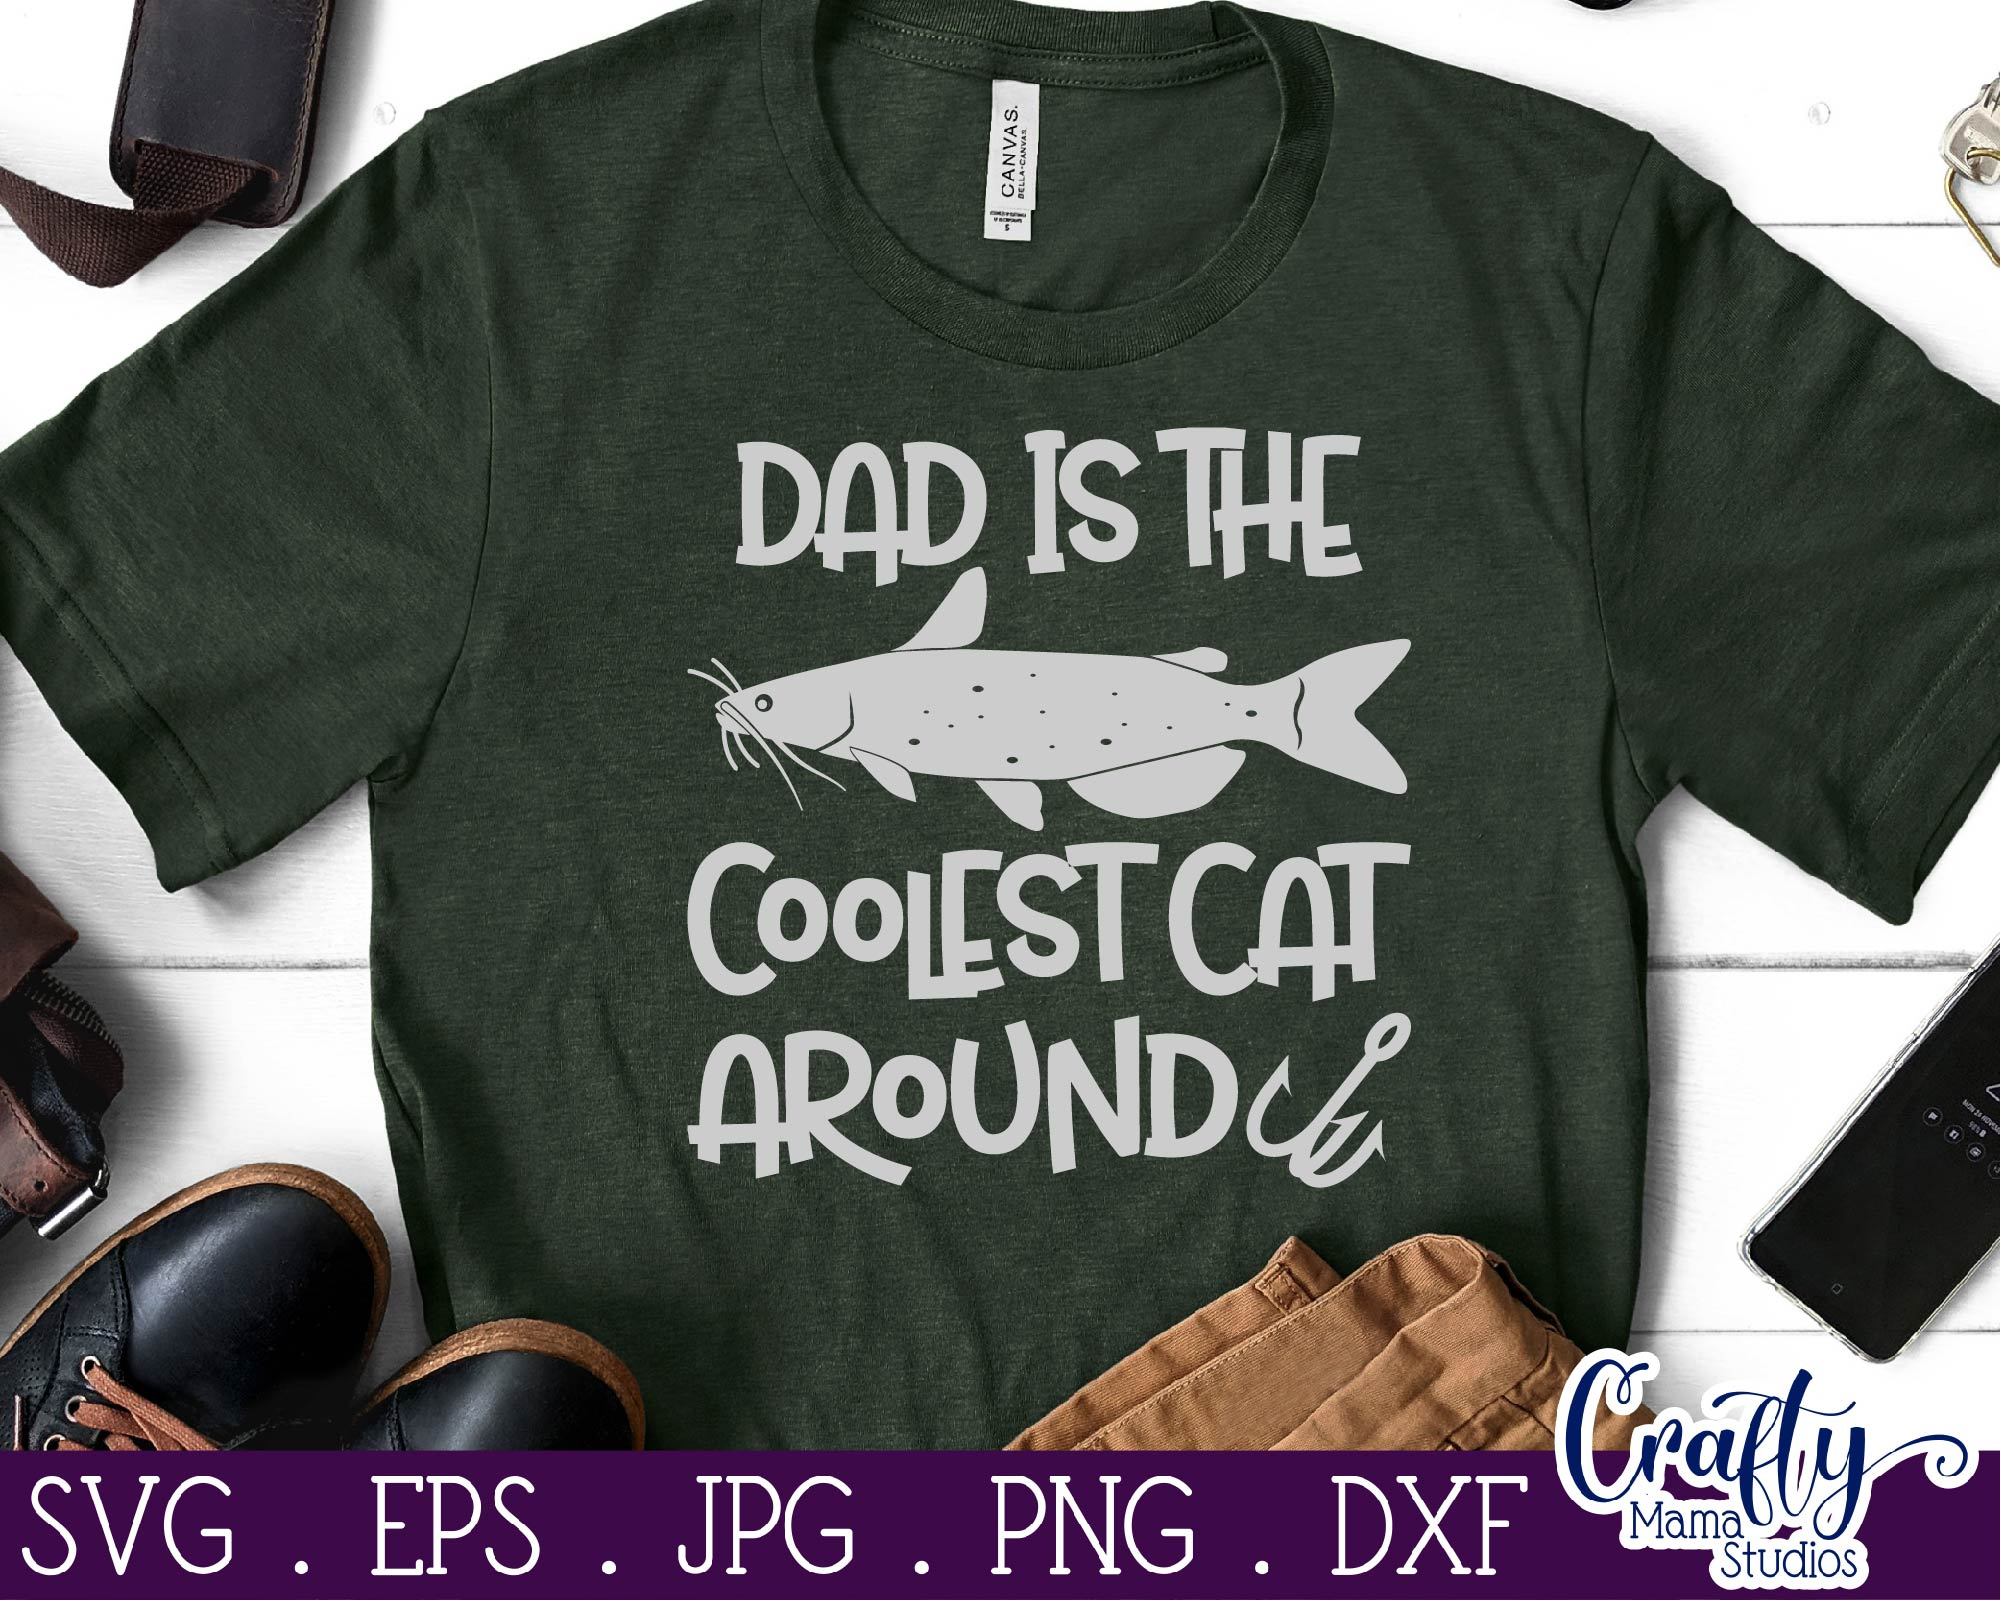 Download Dad Is The Coolest Cat Around Svg Fishing Svg Dad Svg Catfish Svg So Fontsy